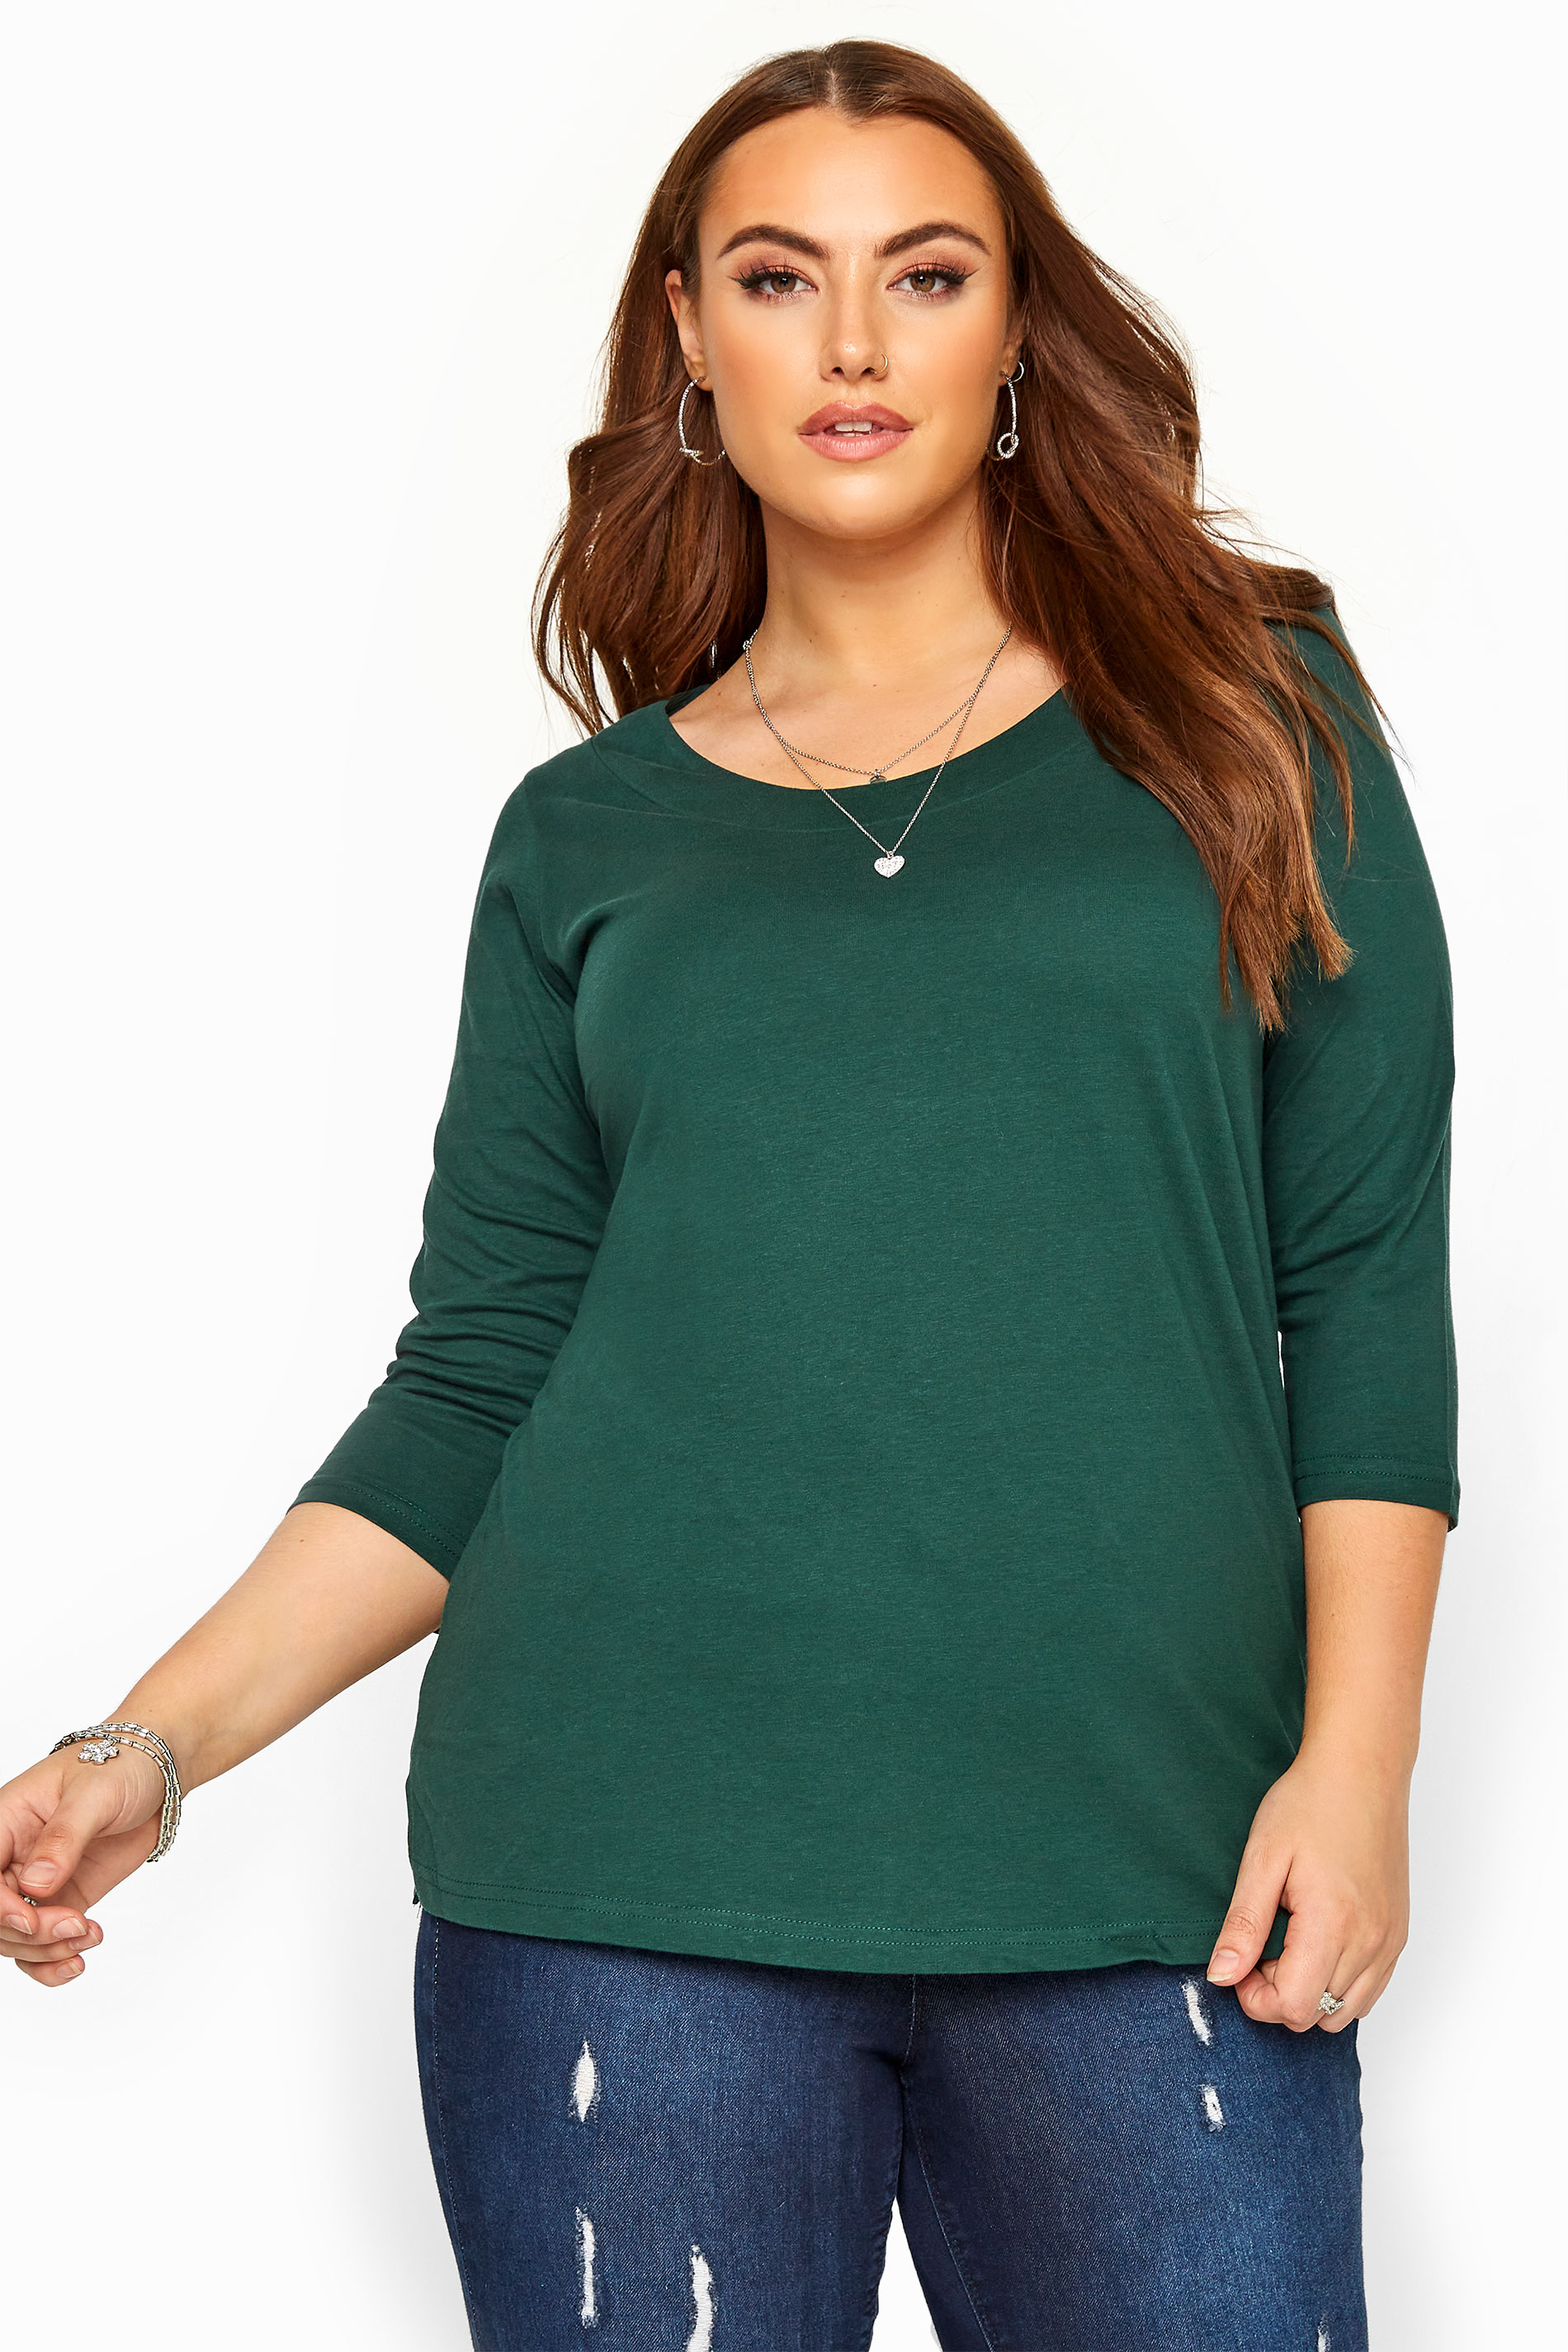 Dark Green 3/4 Length Sleeve Jersey Top | Sizes 16-36 | Yours Clothing